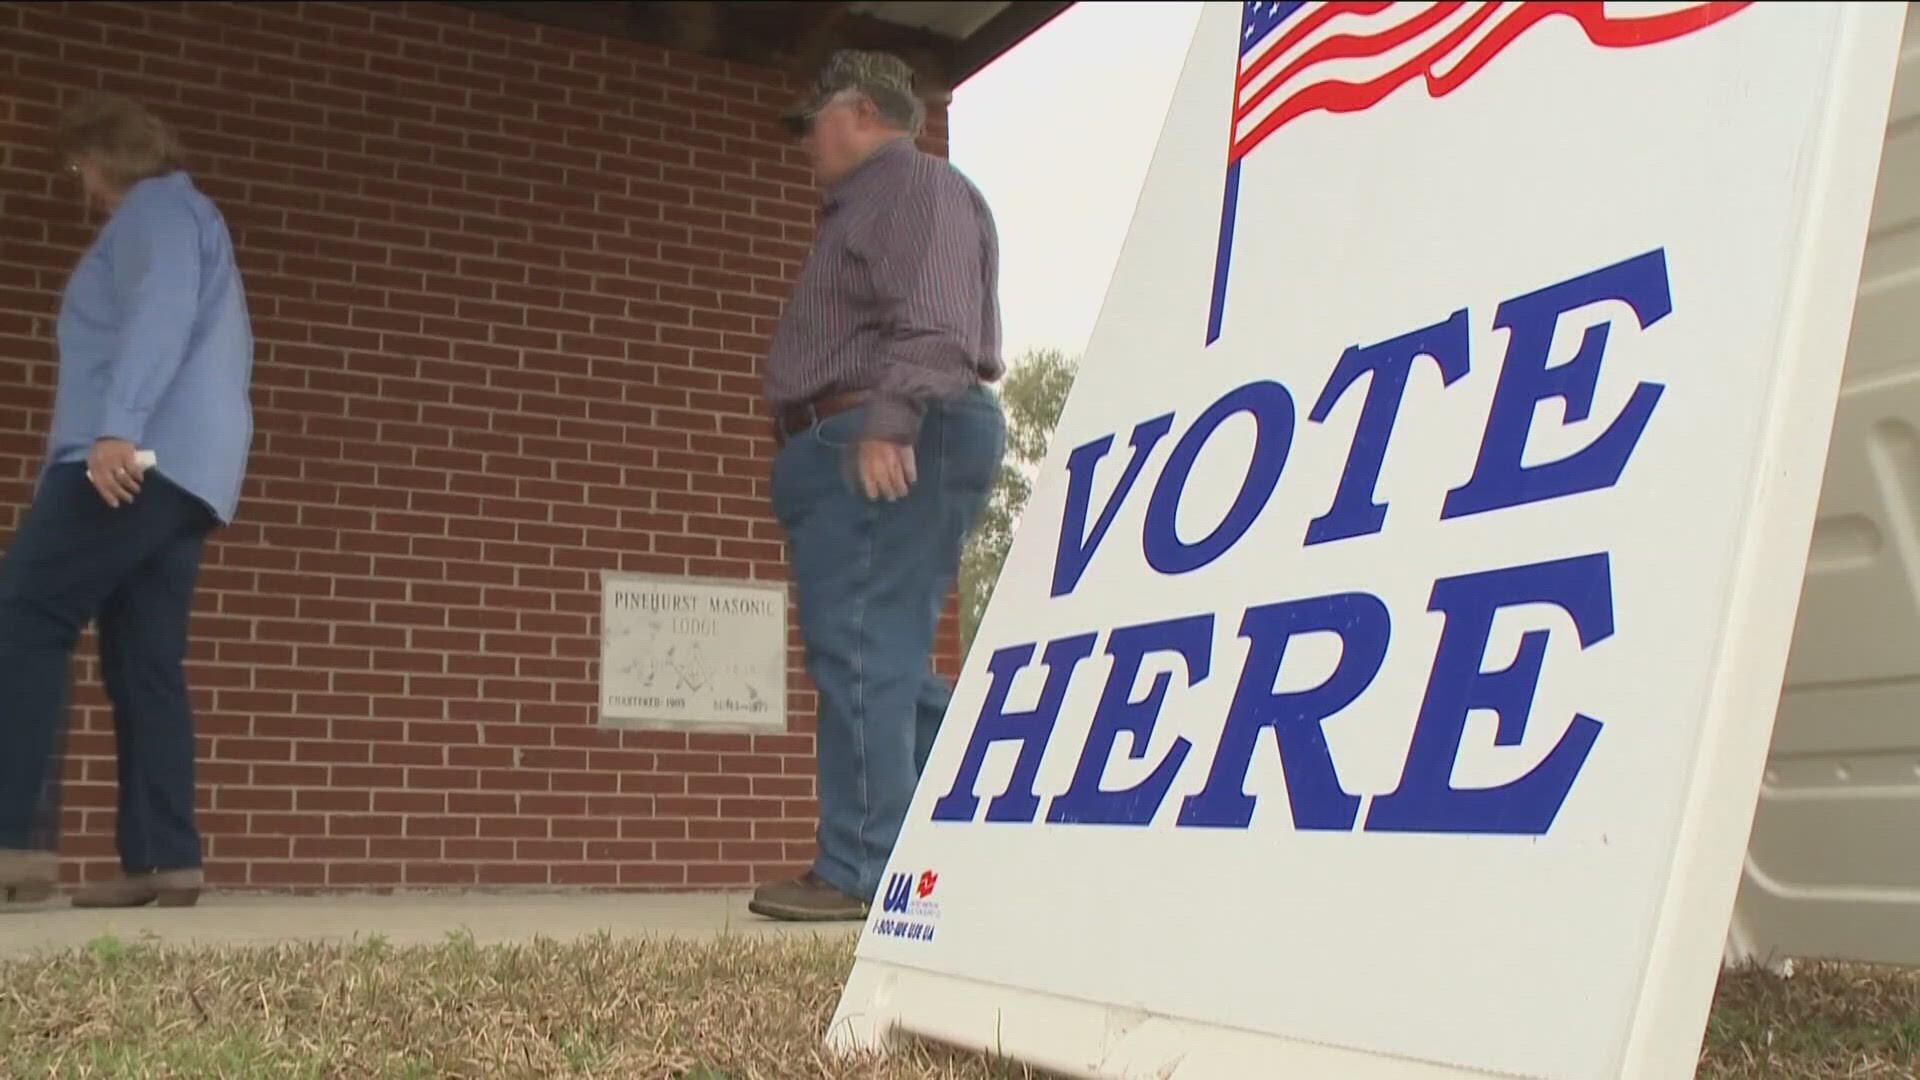 Georgians headed to the polls once again to cast a ballot in a few metro Atlanta races that were sent to runoffs.